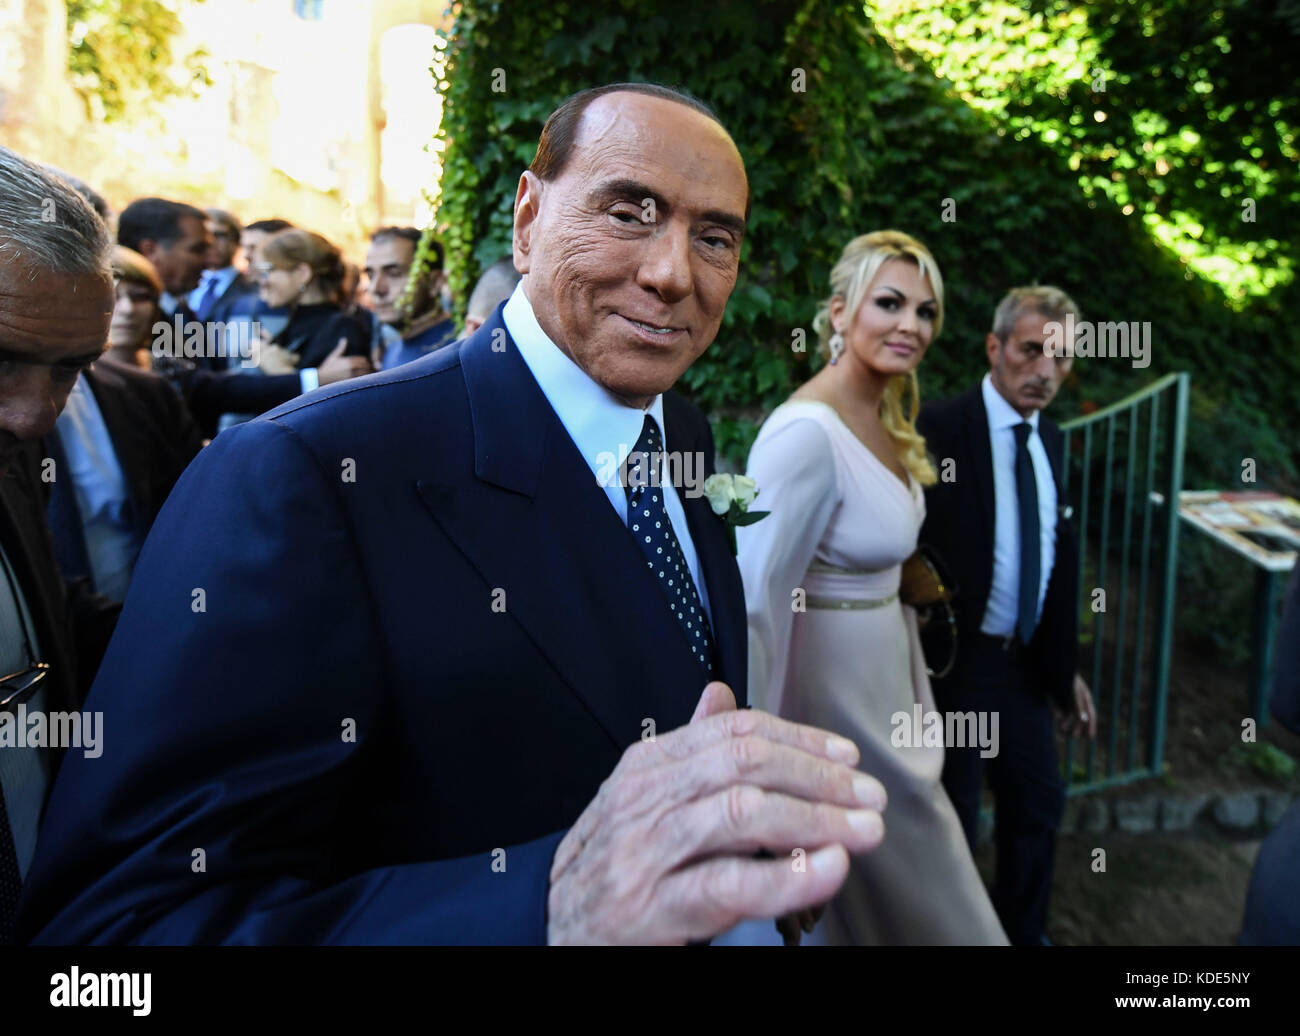 Ravello, Italy. 13th Oct, 2017. Silvio Berlusconi and Francesca Pascale in Ravello, at the wedding of her sister Marianna Pascale. 13/10/2017, Ravello, Italy Credit: Independent Photo Agency Srl/Alamy Live News Stock Photo